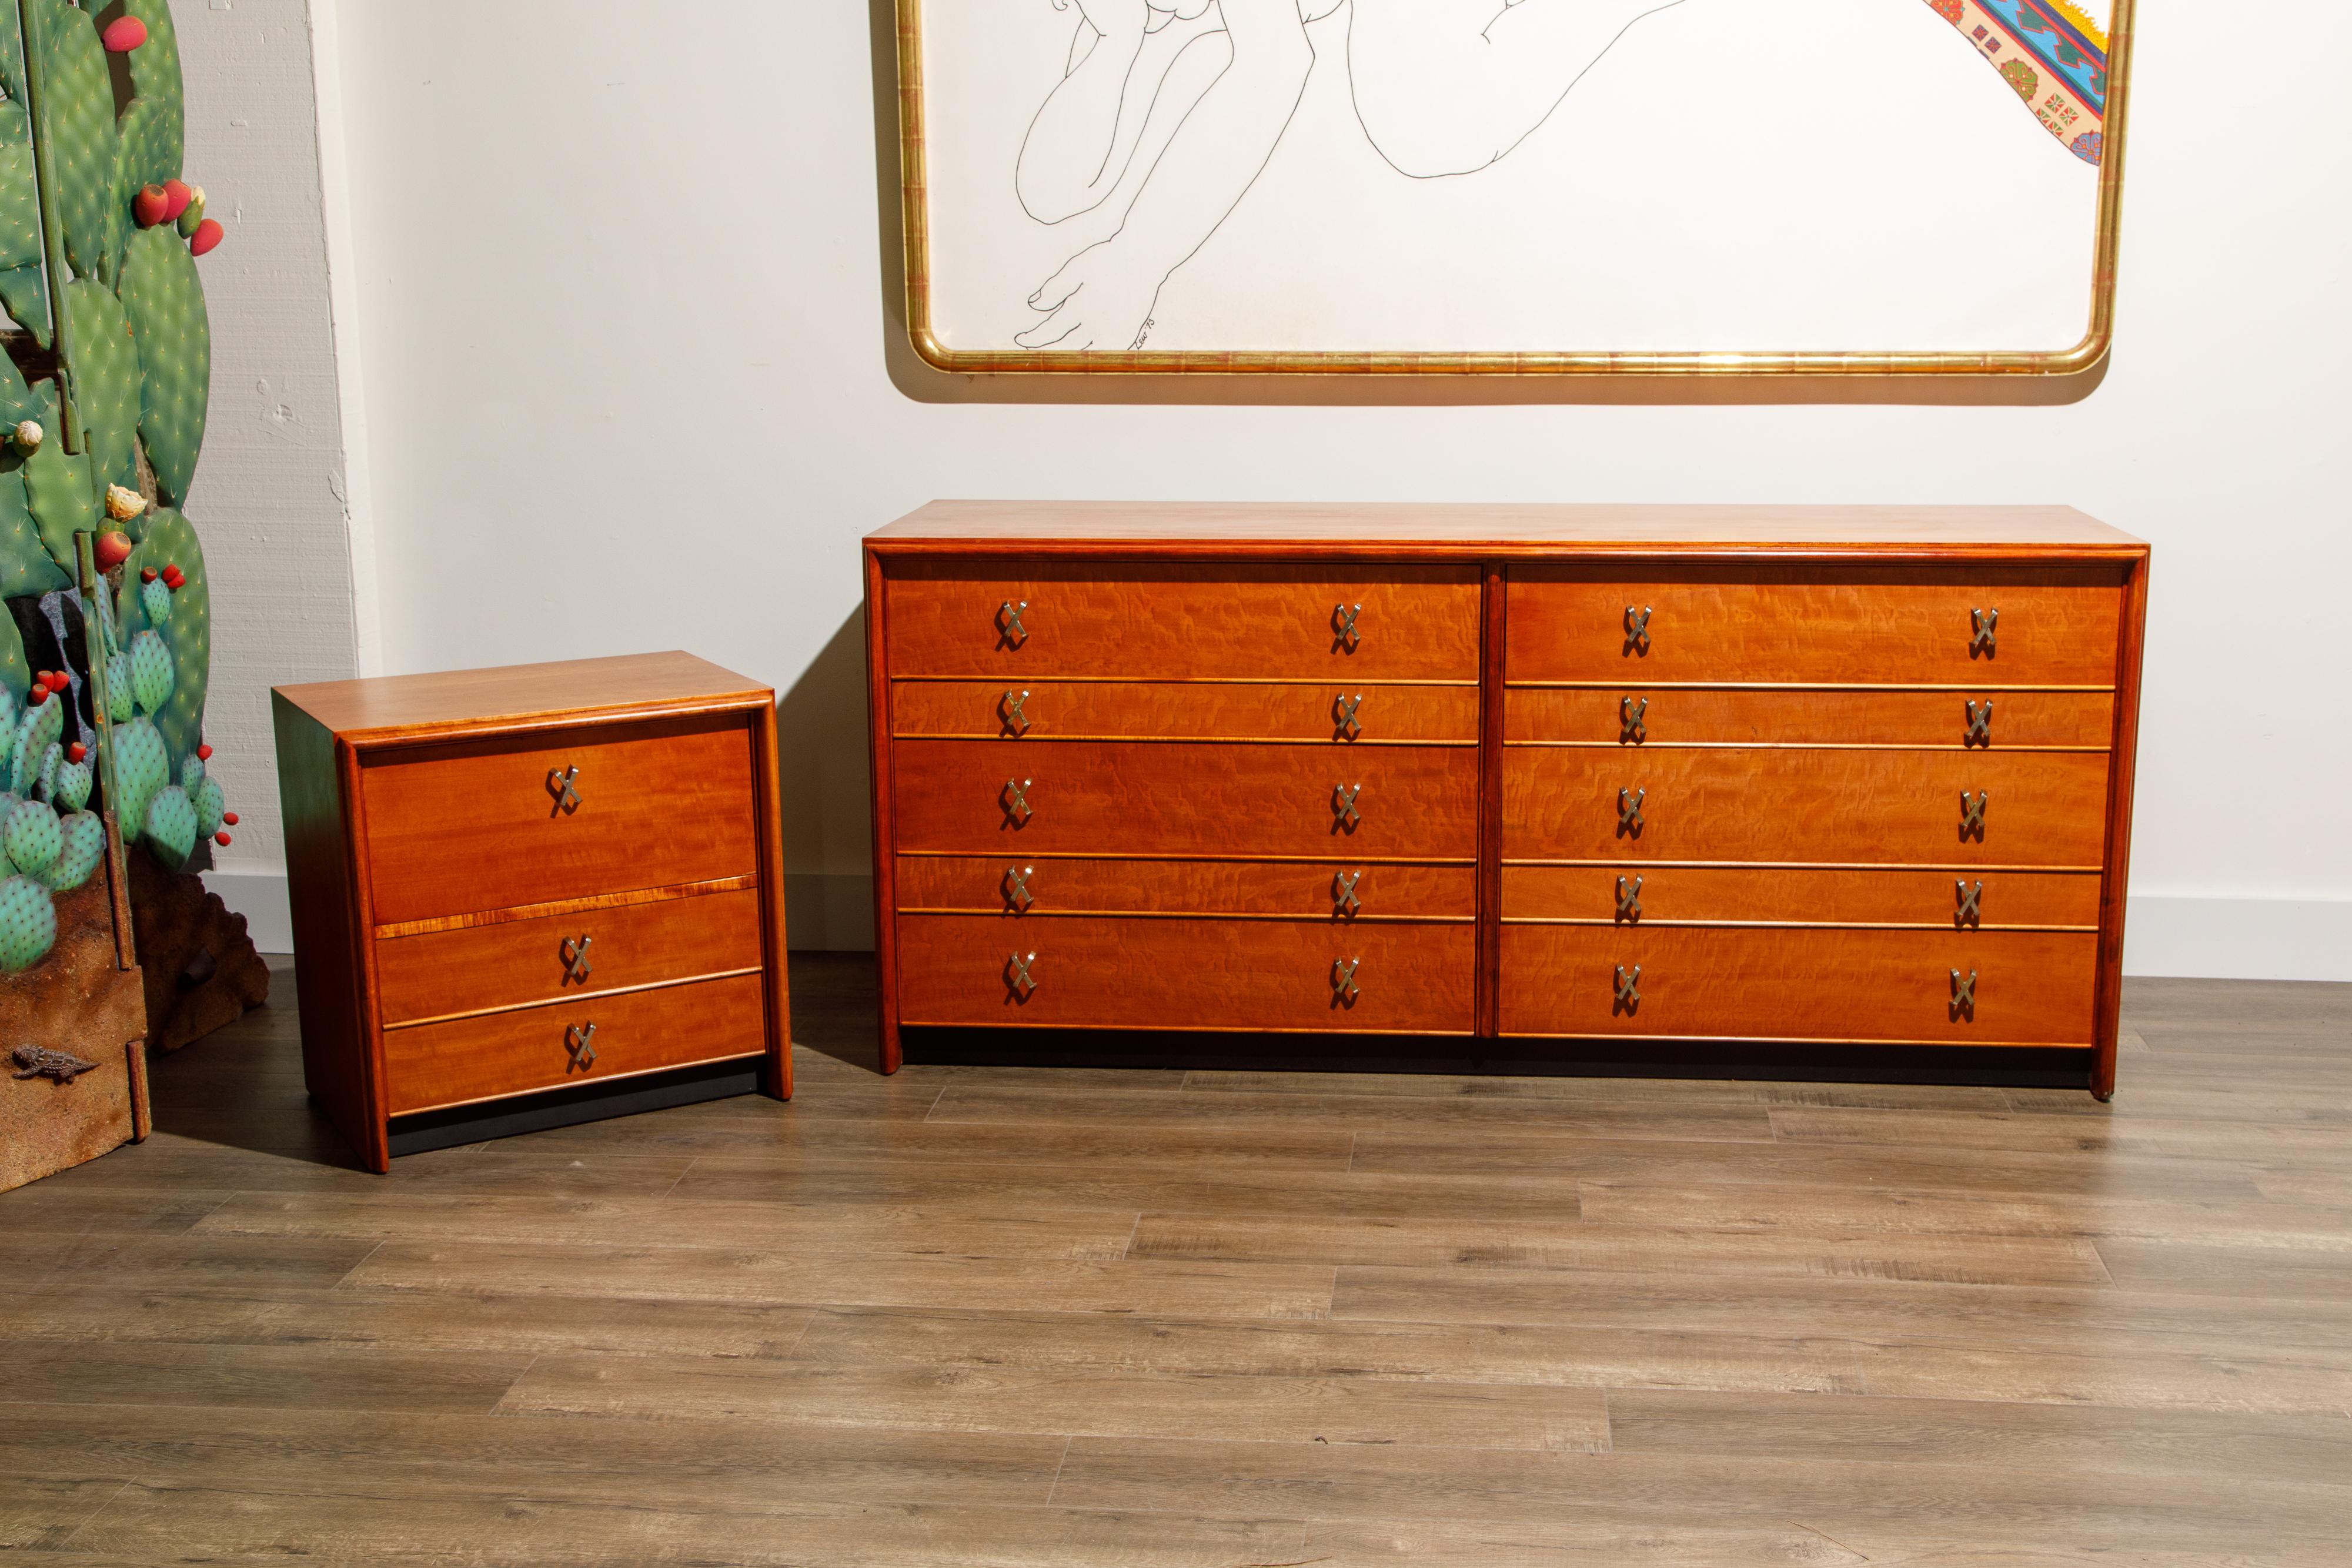 This fantastic 1950s ten-drawer double dresser and nightstand was designed by Paul Frankl for Johnson Furniture and retailed by John Stuart during the 1950s. Crafted from a beautiful exotic wood, front drawers appears to be possibly a quilted maple